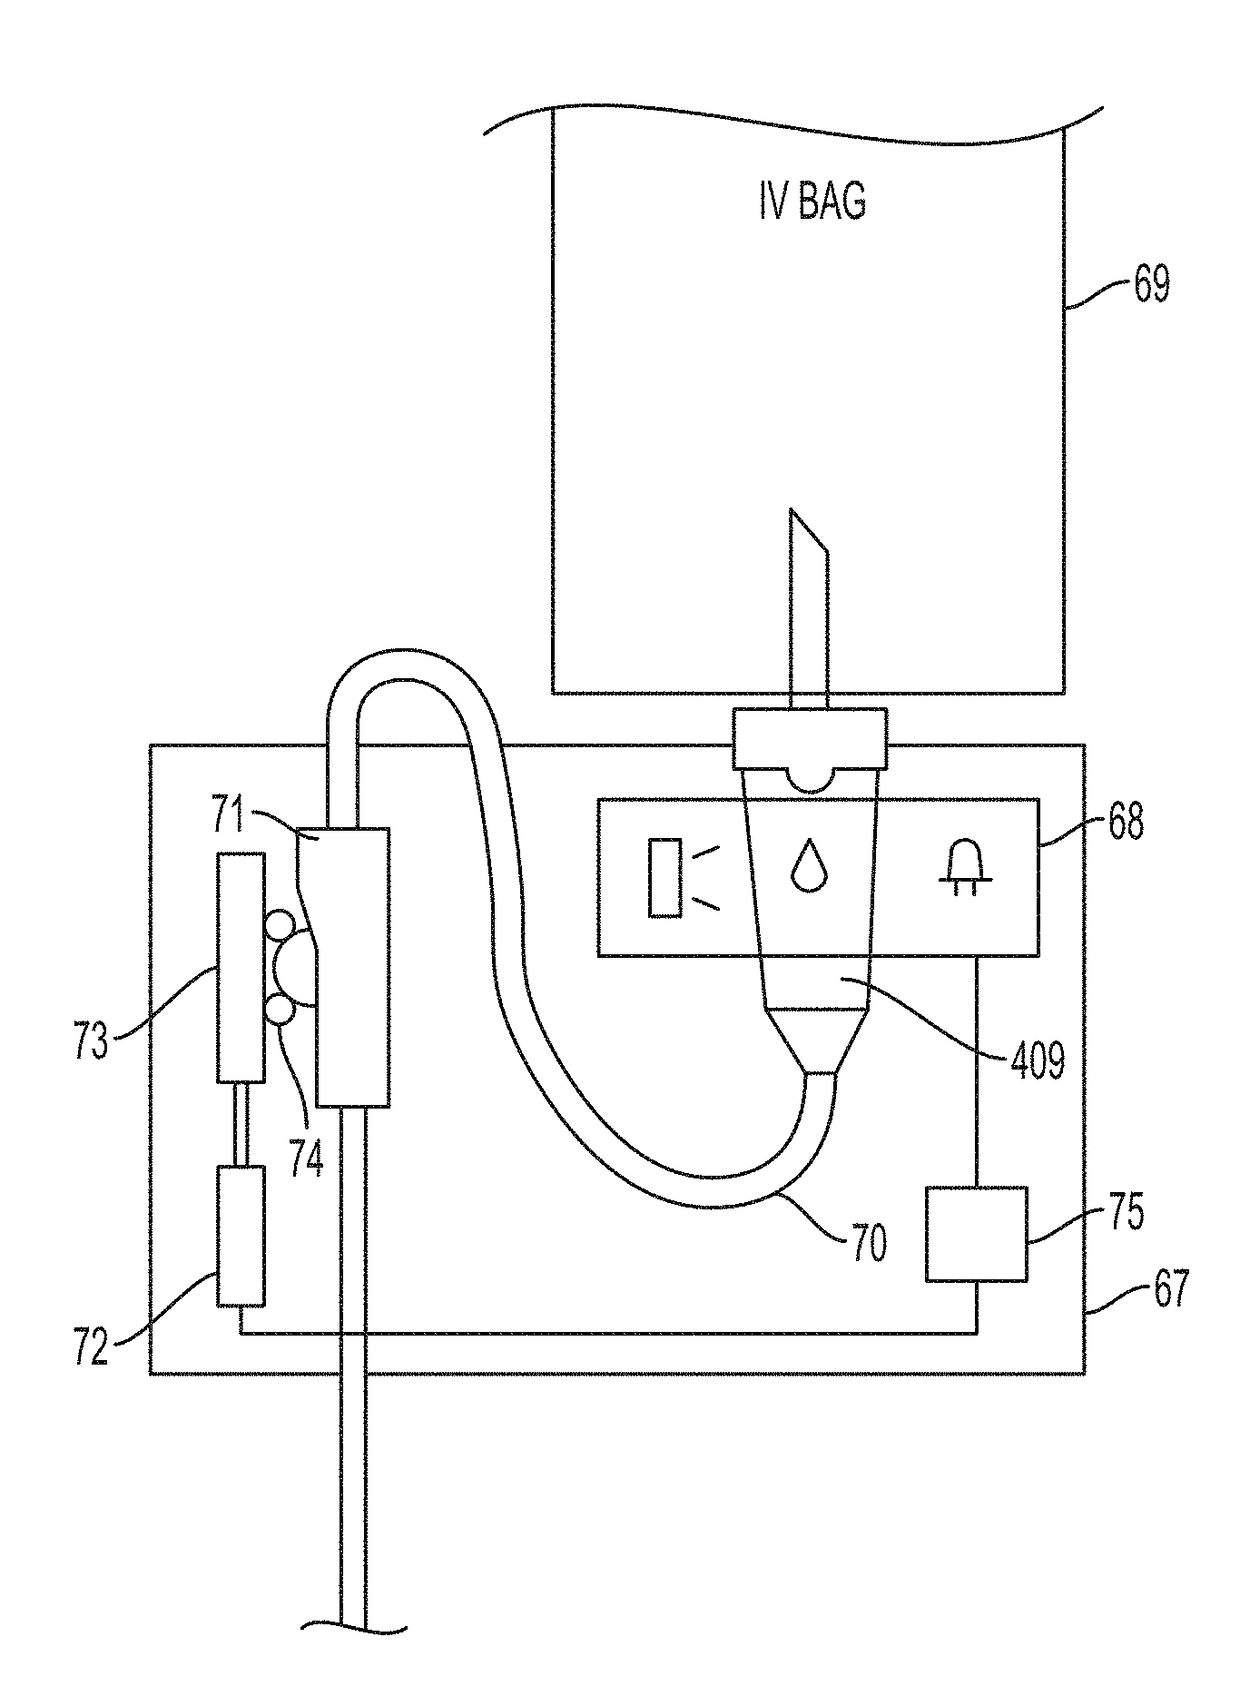 Apparatus for monitoring, regulating, or controlling fluid flow